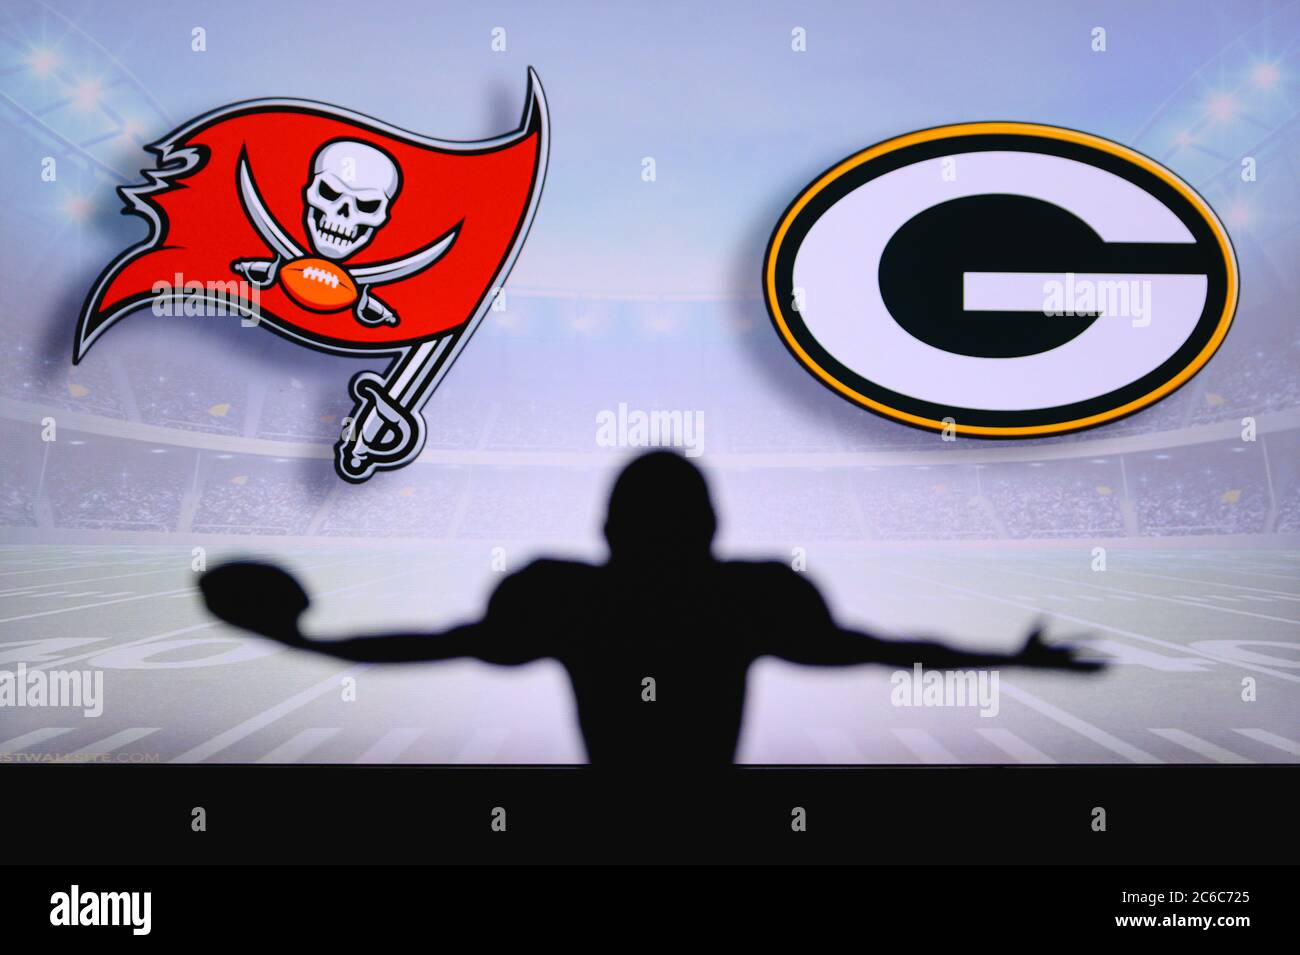 tampa bay buccaneers green bay packers tickets